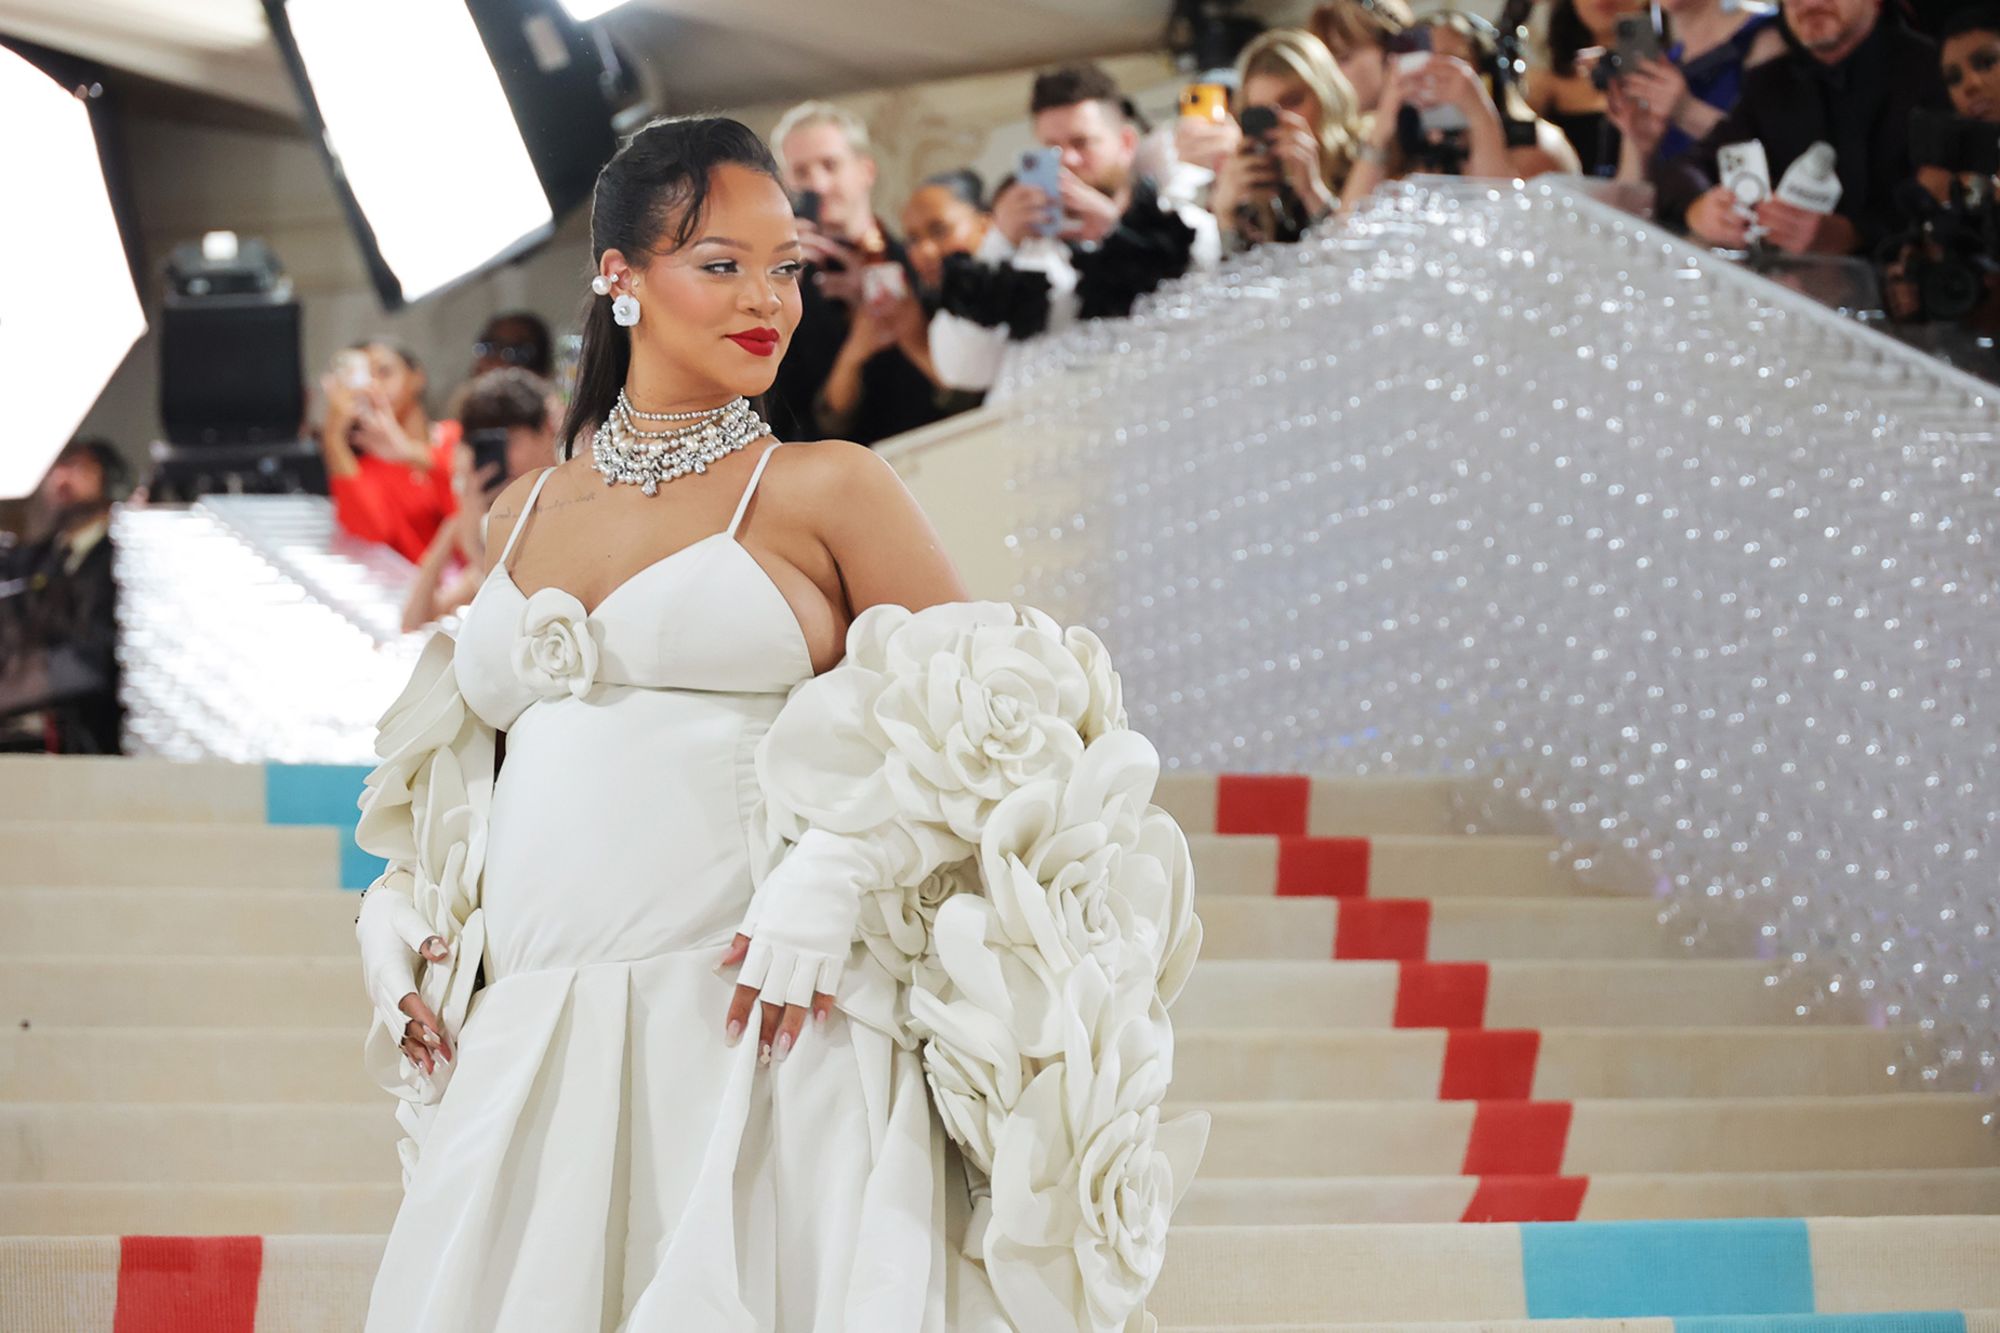 Rihanna's arrival last year marked the grand finale of the red carpet.